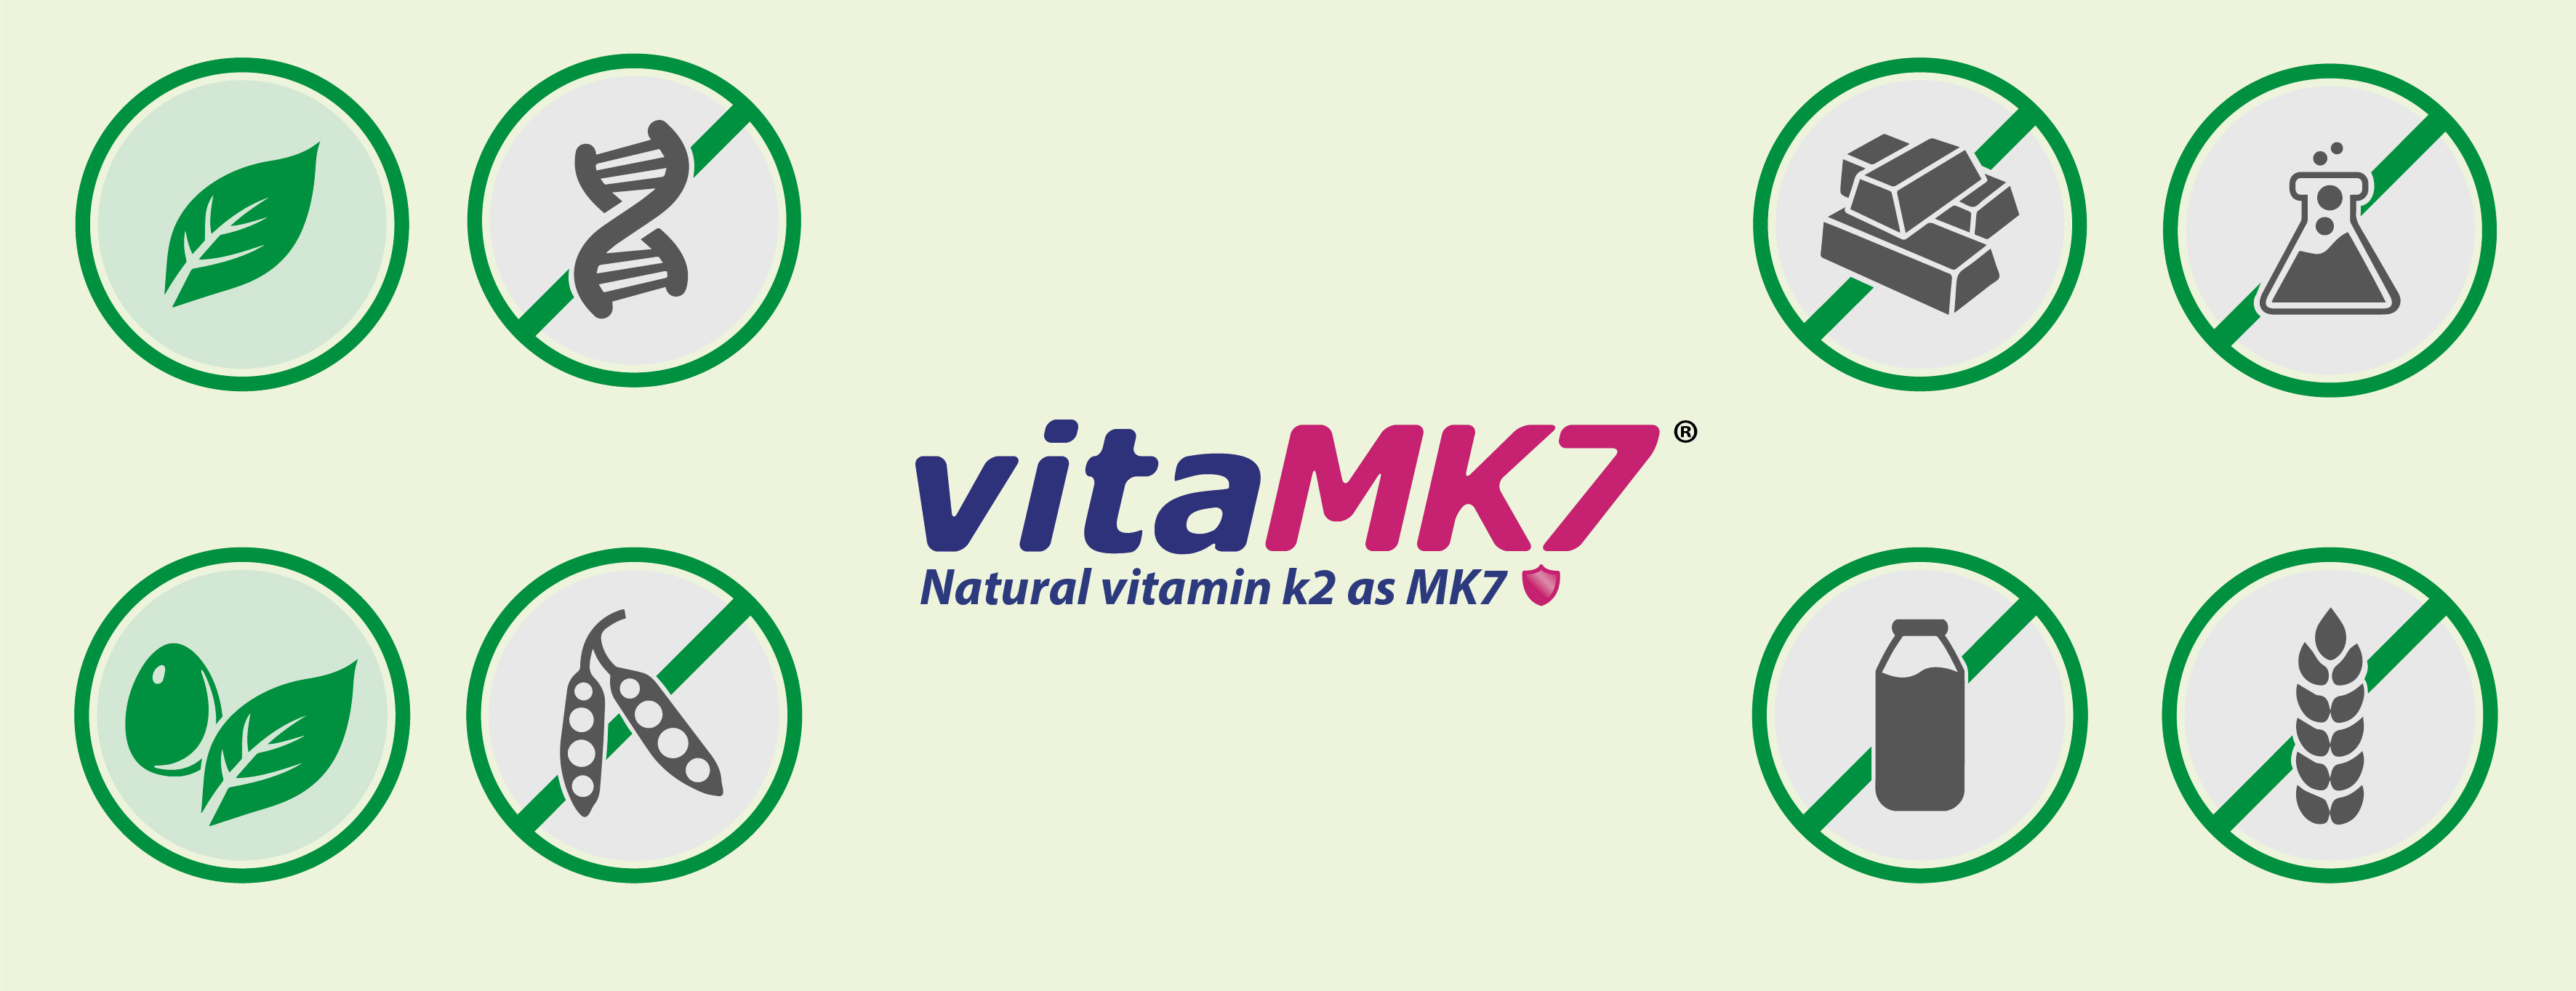 Gnosis report unveils high stability of vitaMK7 